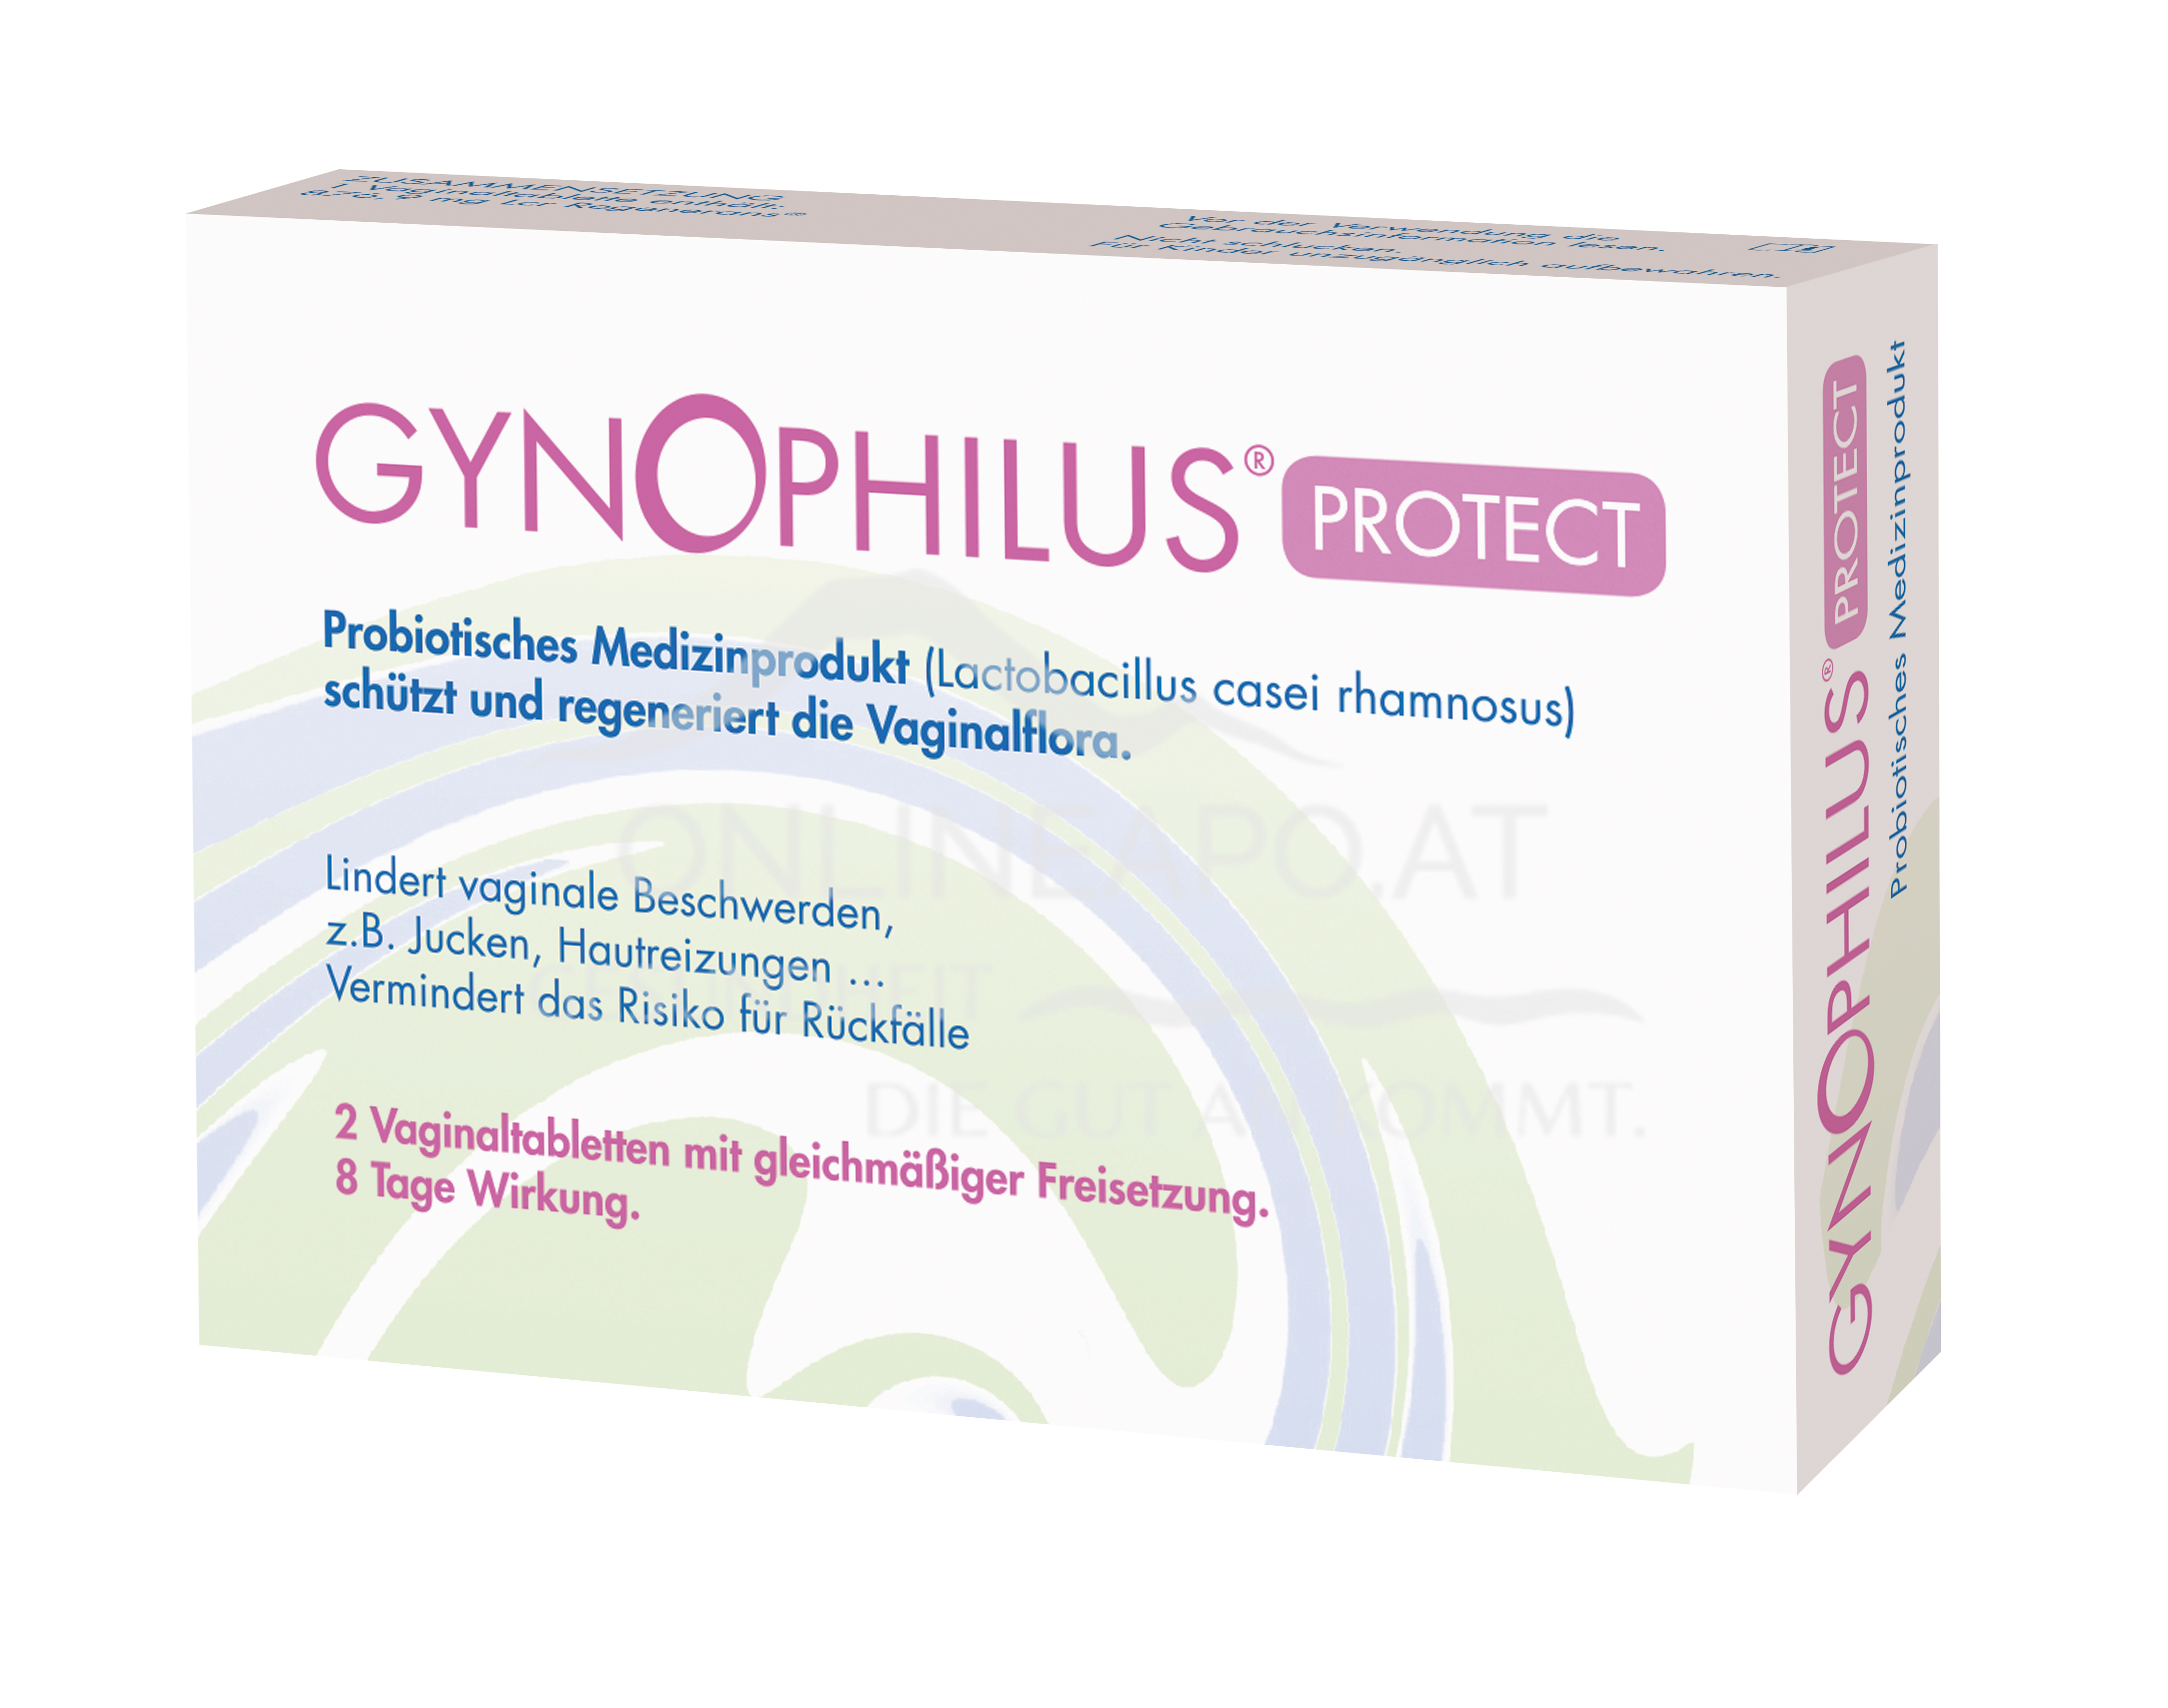 Gynophilus® Protect